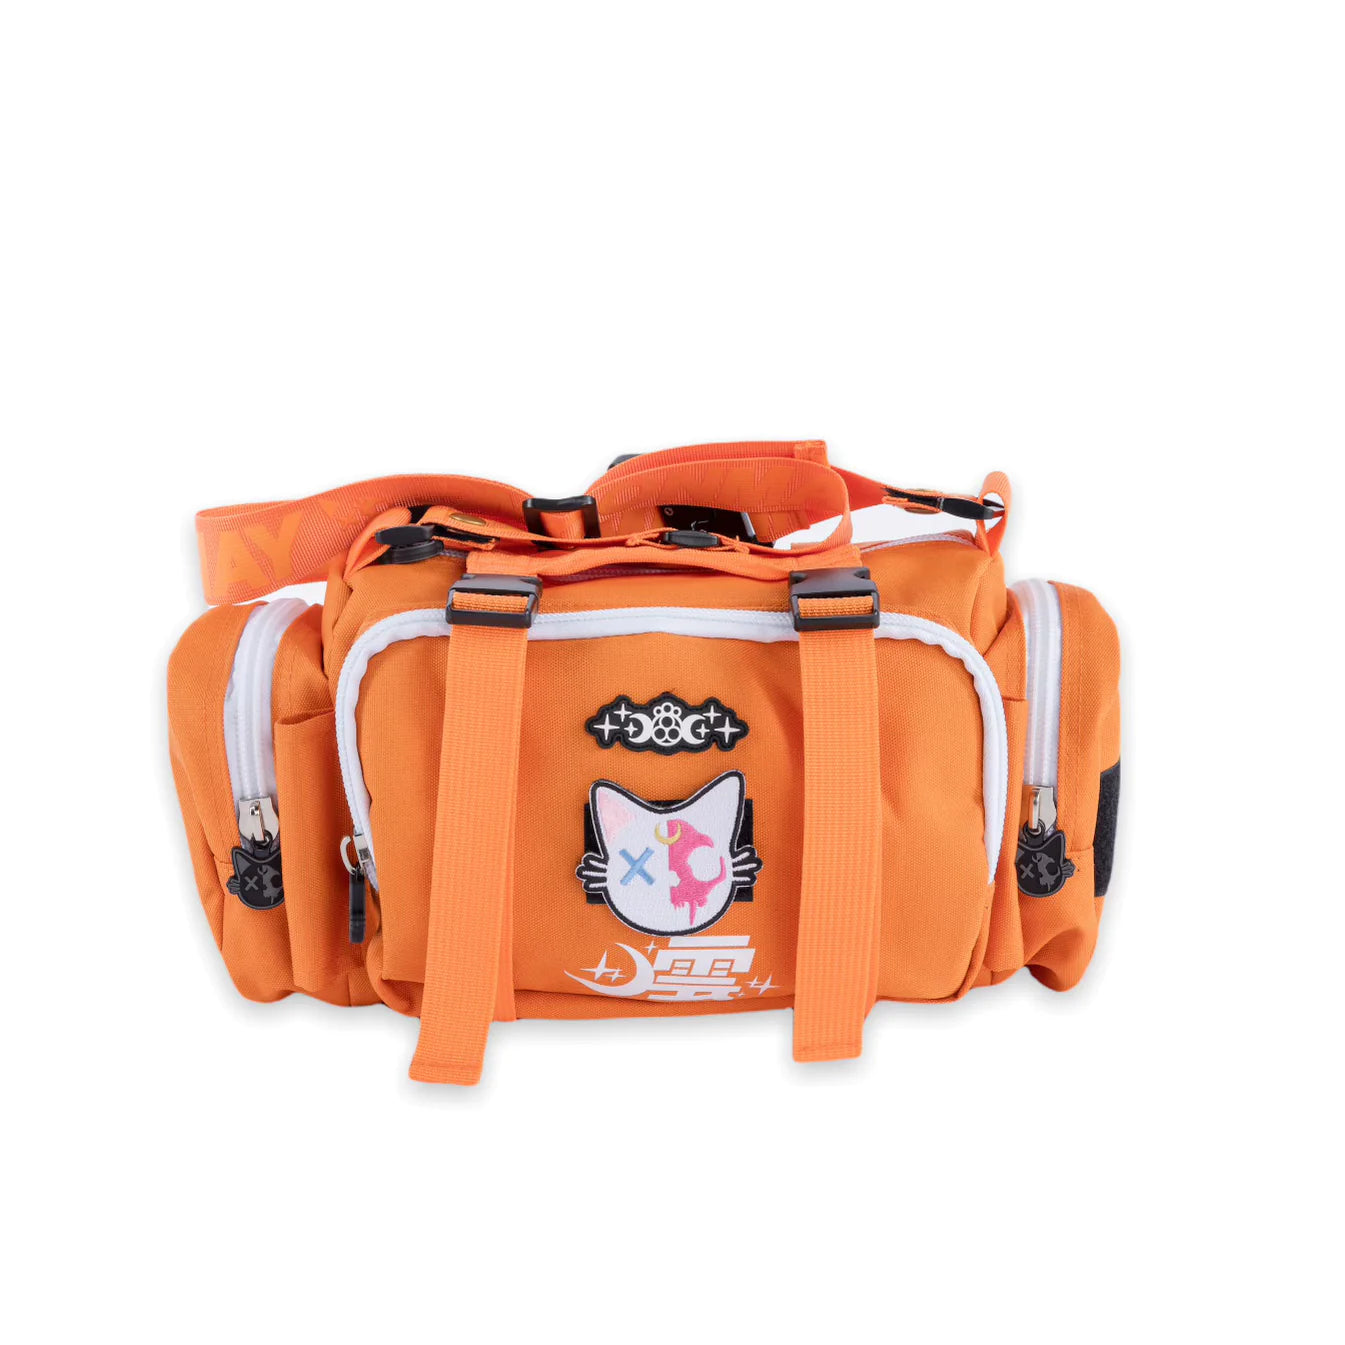 SHWA - Venus Mini Duffle with Strap (Pre-Order) Patches Included